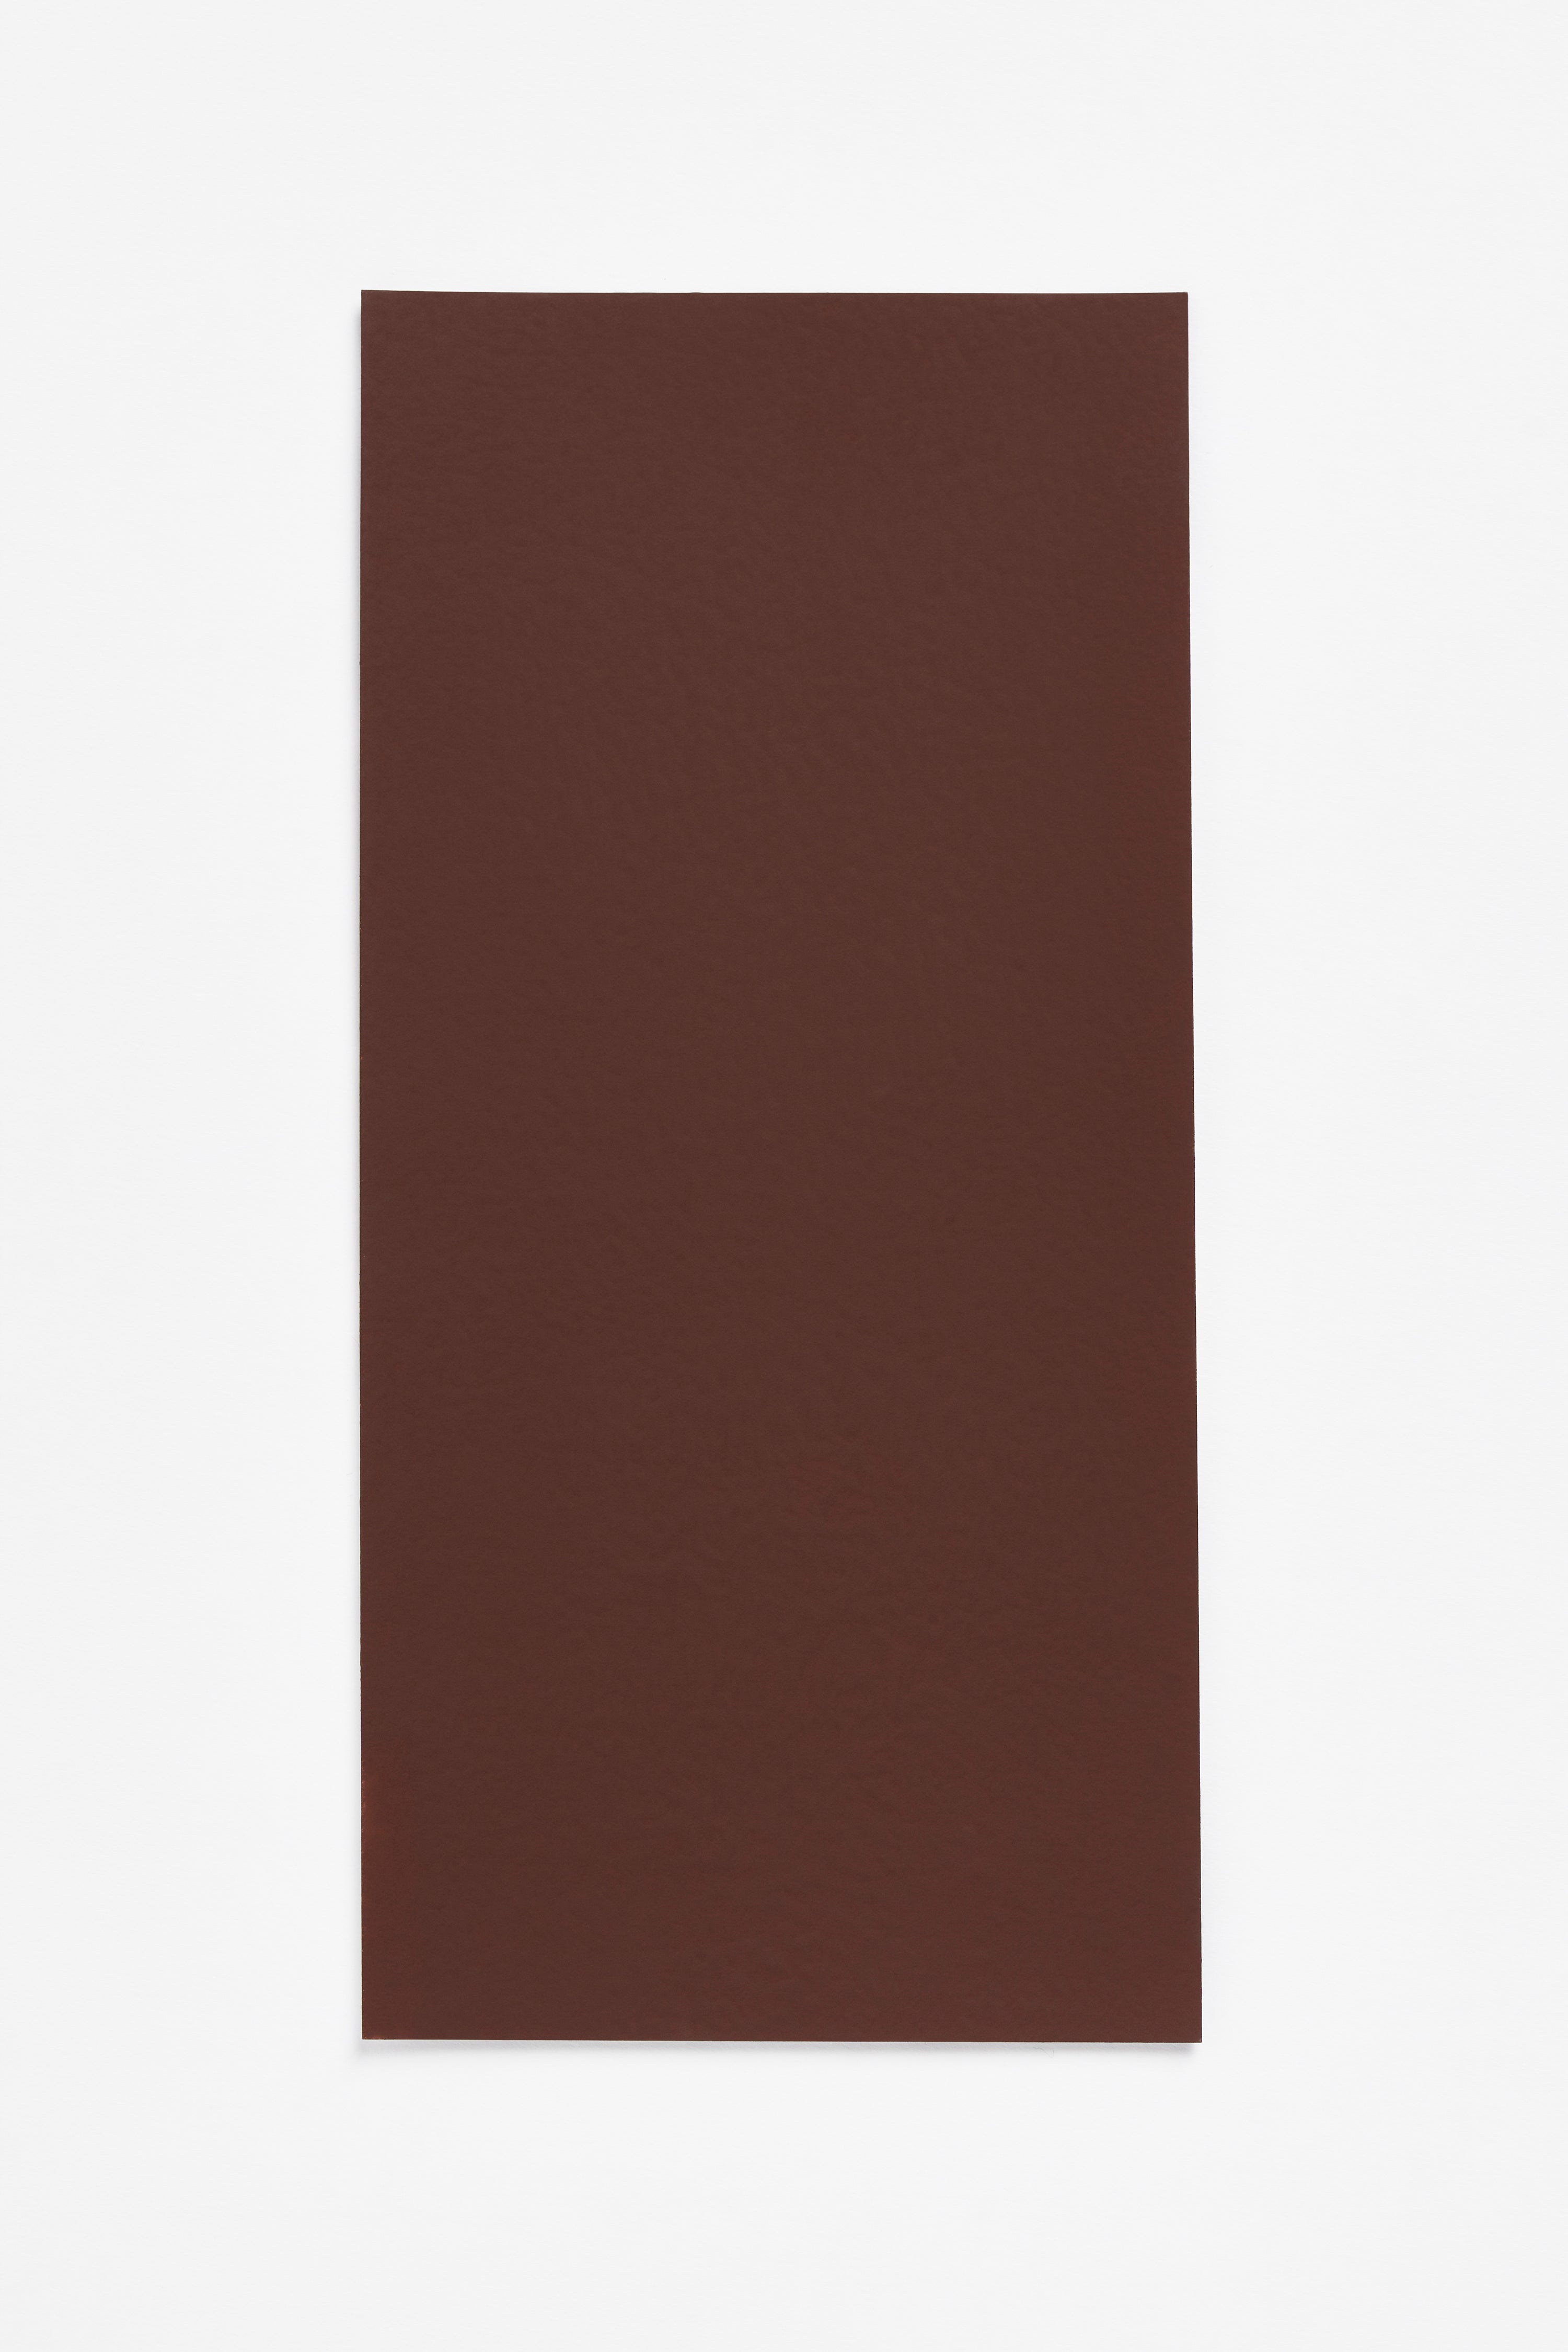 Corten — a paint colour developed by Industrial Facility for Blēo